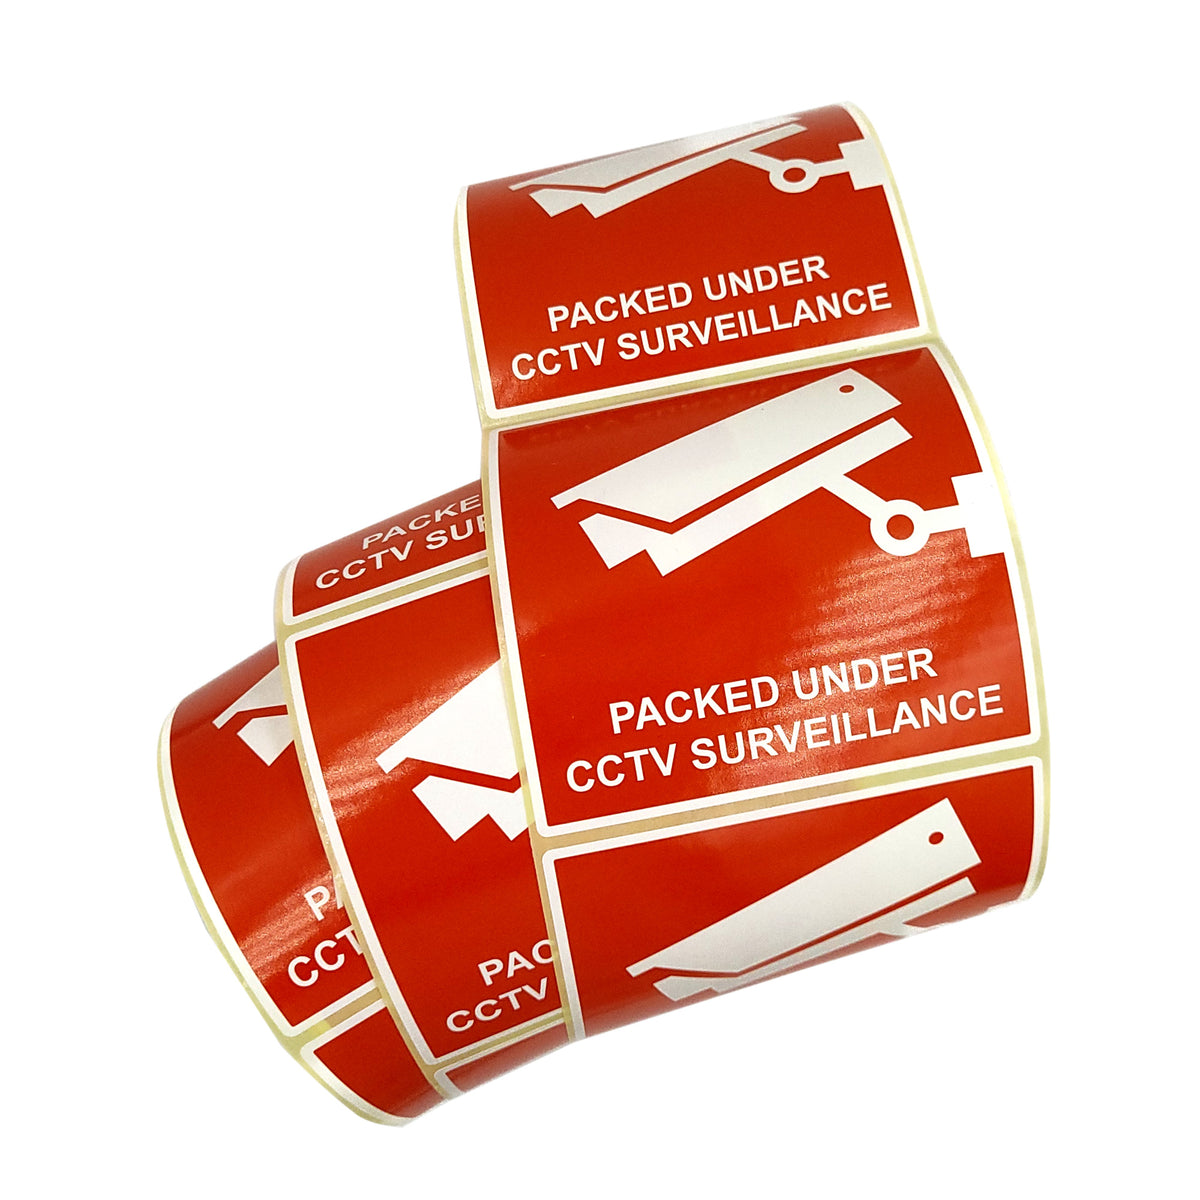 Self-adhesive warning labels - Packaged under camera surveillance! - 98x98mm 500 per roll